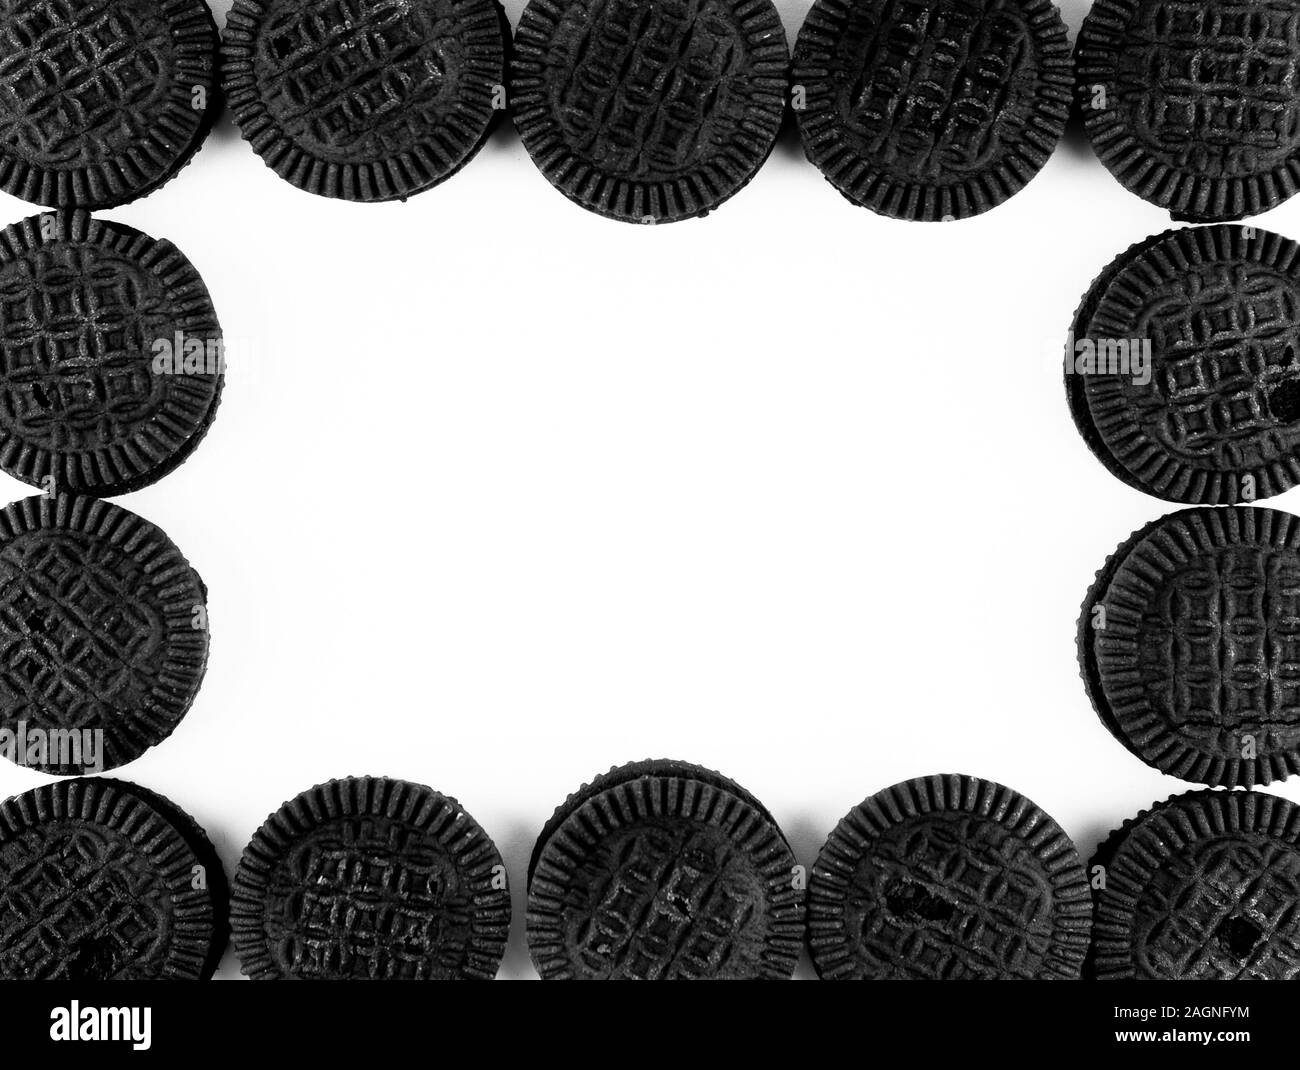 A frame made of sandwich cookies on white background Stock Photo